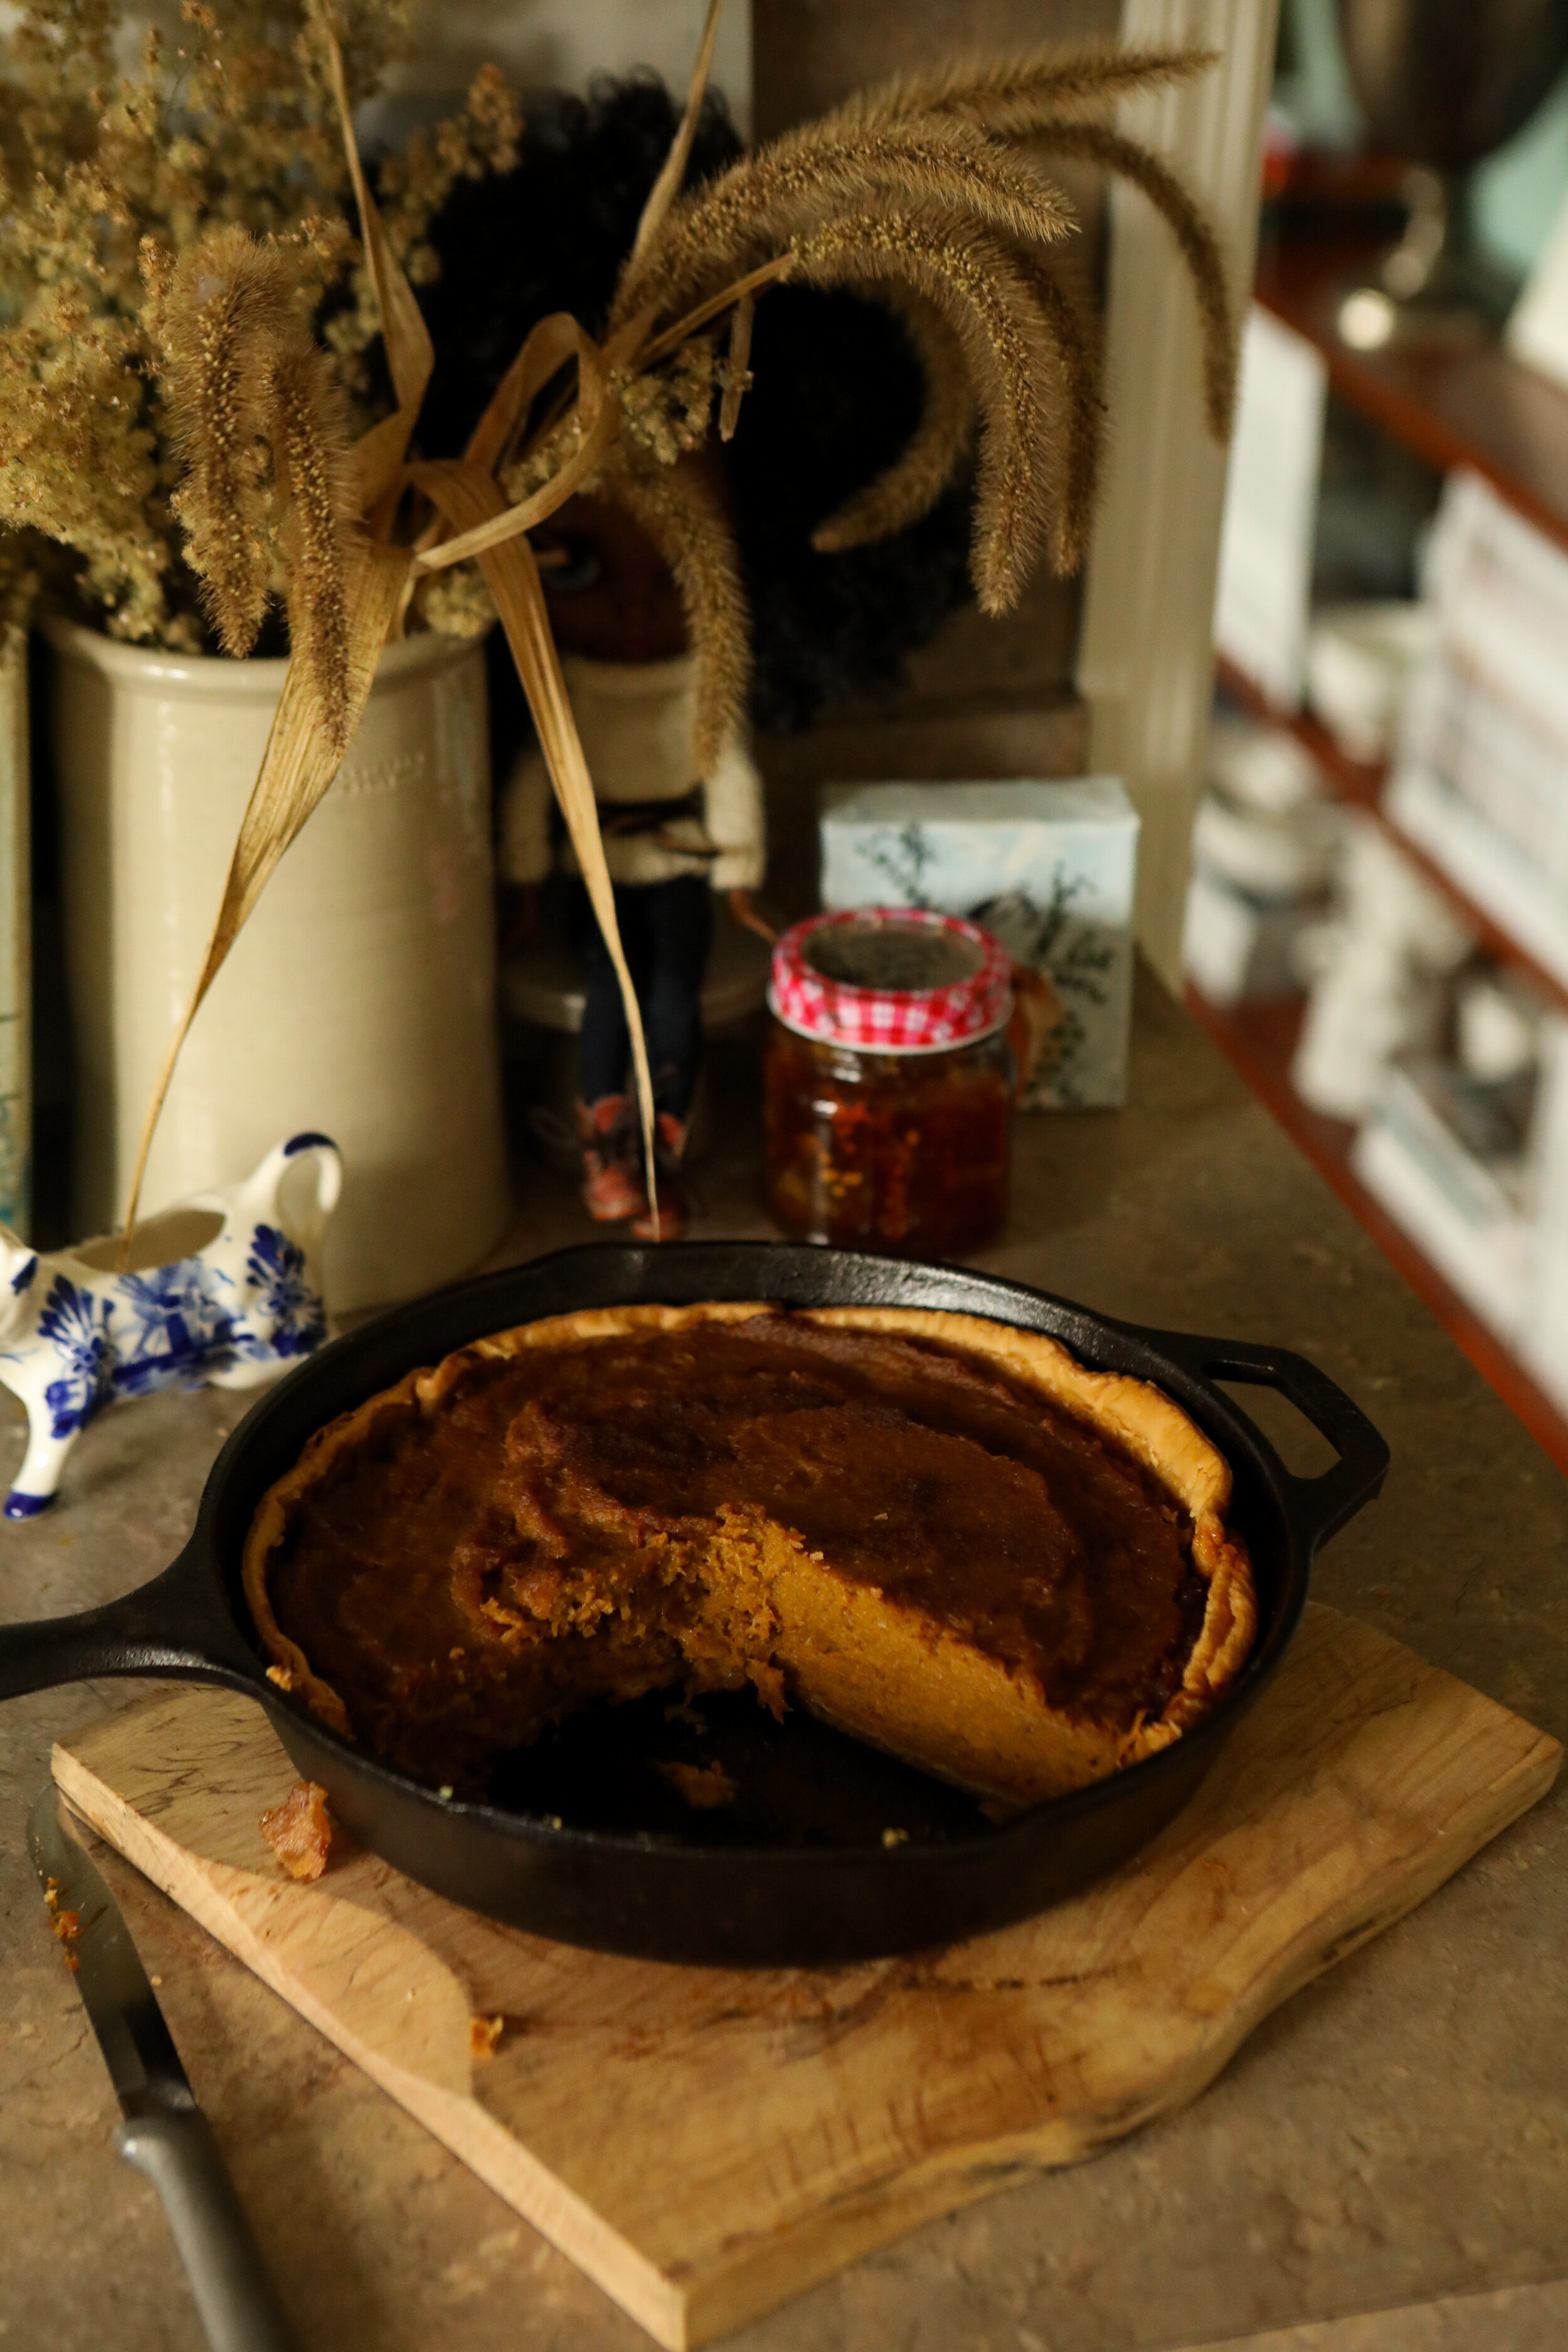  This was the year I mastered the pumpkin pie. I will share this recipe tomorrow.  With all of the pumpkins I bought I knew I’d be cooking with all of them over the coming months. This pie has been trial and error as I try to create something I enjoy